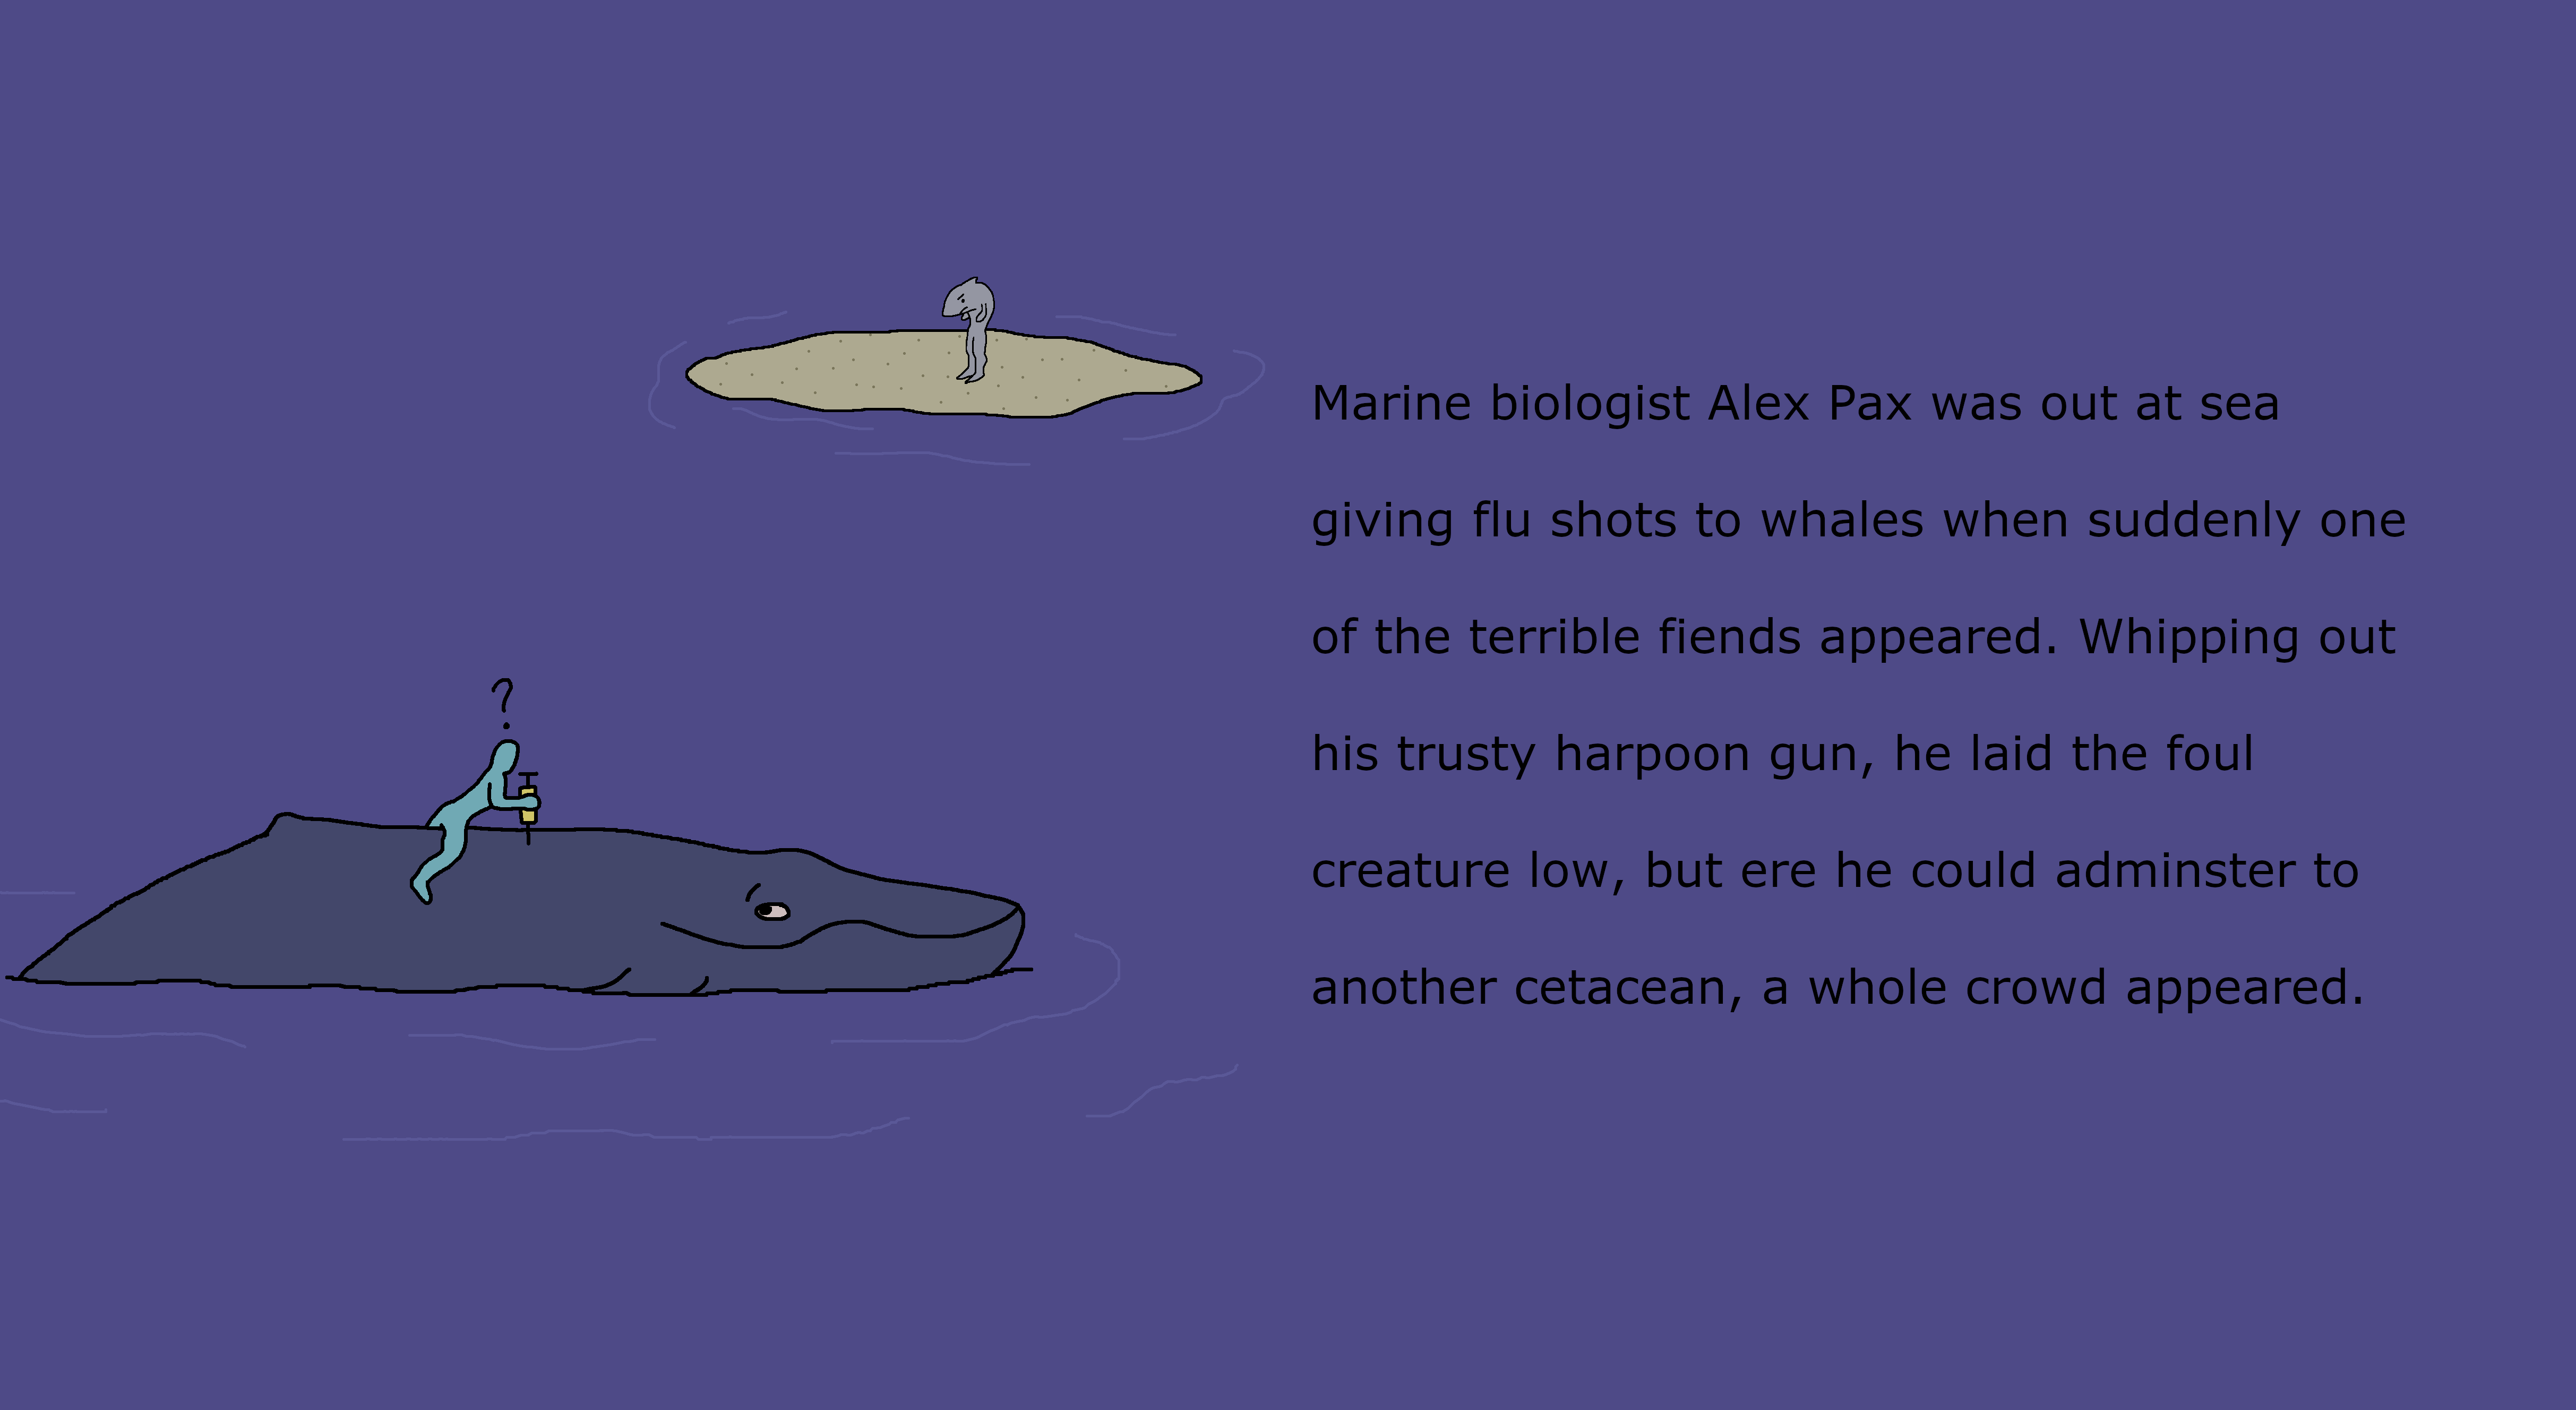 A blue man inserts a syringe into a humpback whale
                    as he looks, confused, at a man-shark. A caption reads,
                    'Marine biologist Alex Pax was out at sea giving flu shots
                    to whales when suddenly one of the terrible fiends appeared.
                    Whipping out his trusty harpoon gun, he laid the foul
                    creature low, but ere he could adminster to another cetacean,
                    a whole crowd appeared.'